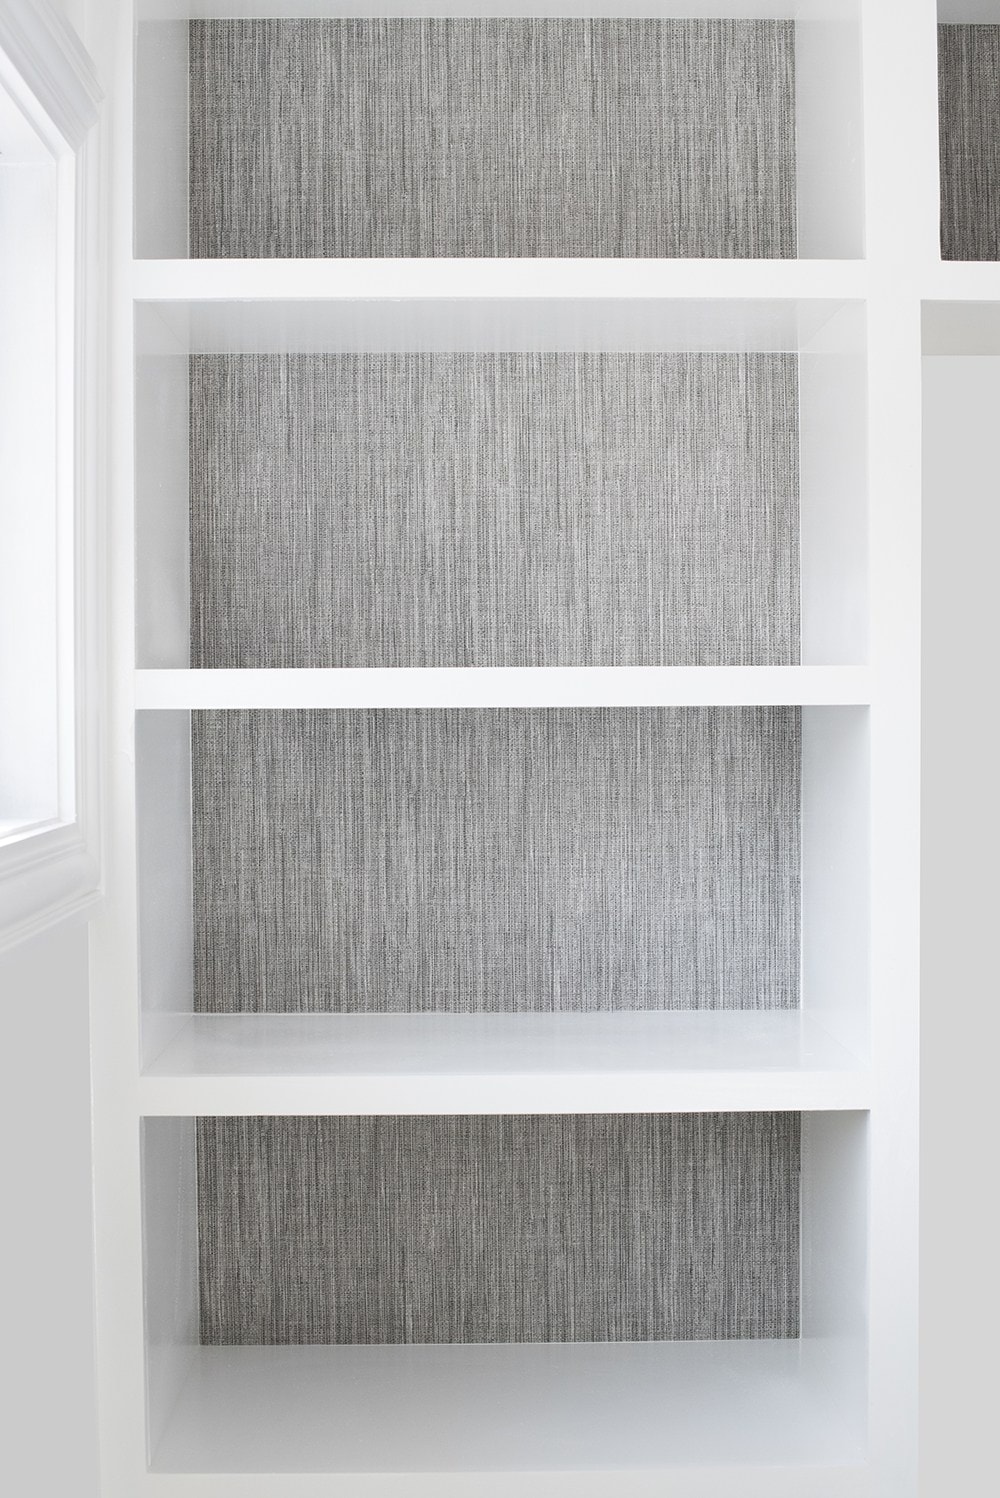 Wallpaper built-ins with grasscloth